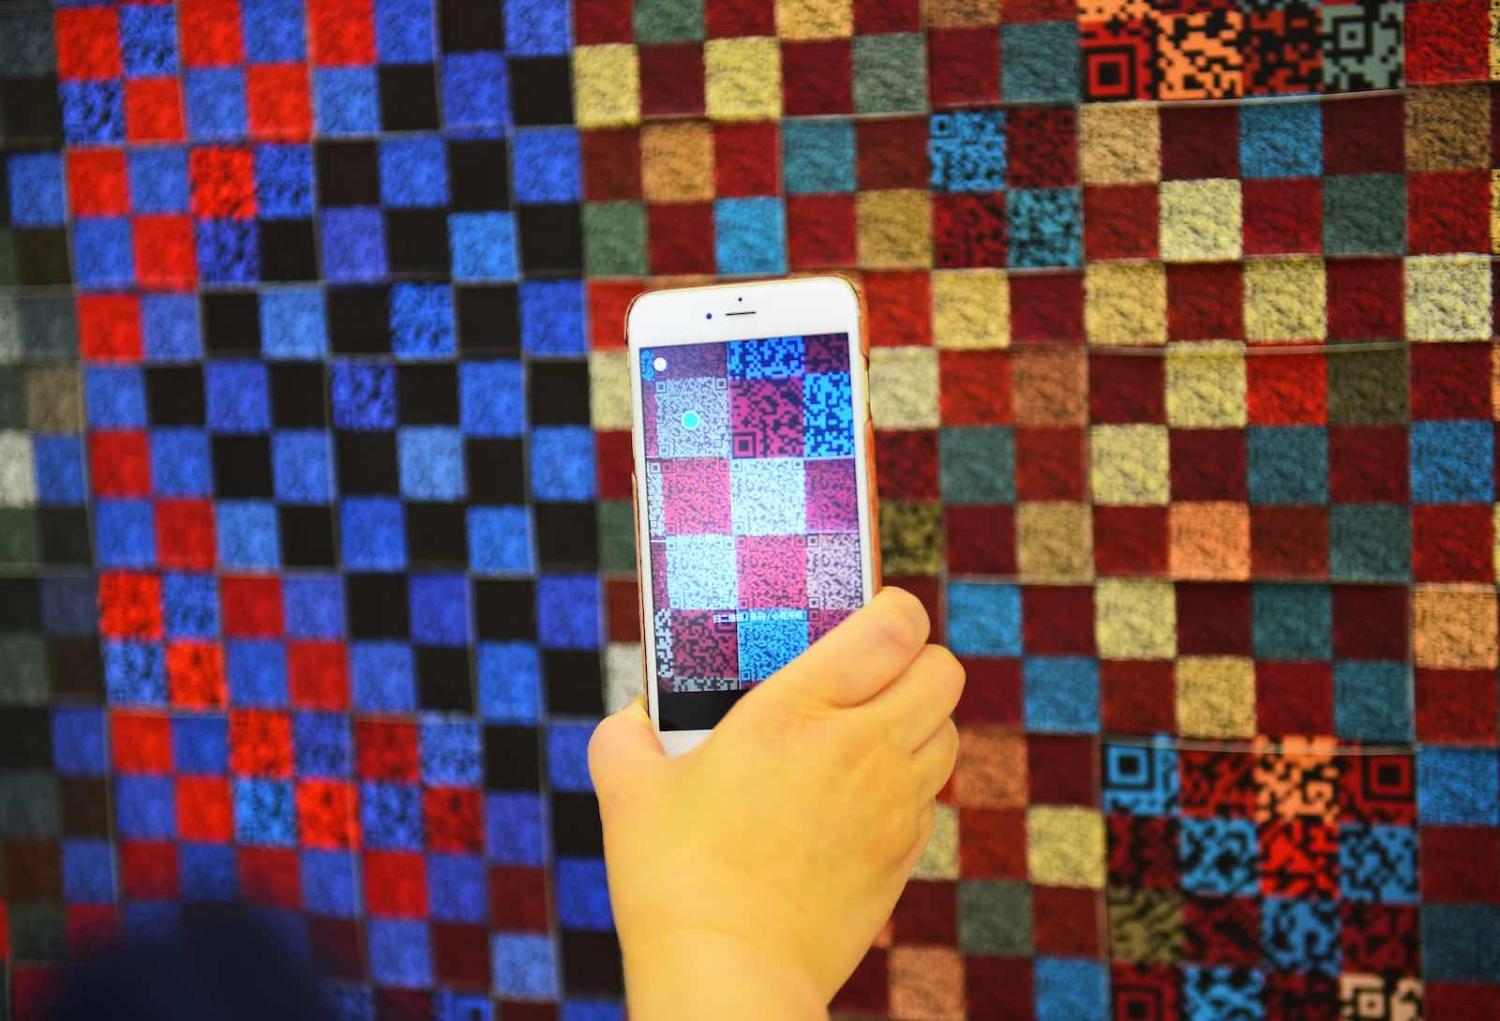 A visitor scans the QR code on an exhibit at an exhibition of traditional crafts in Urumqi, Xinjiang (Hou Zhaokang/Xinhua via Getty Images)